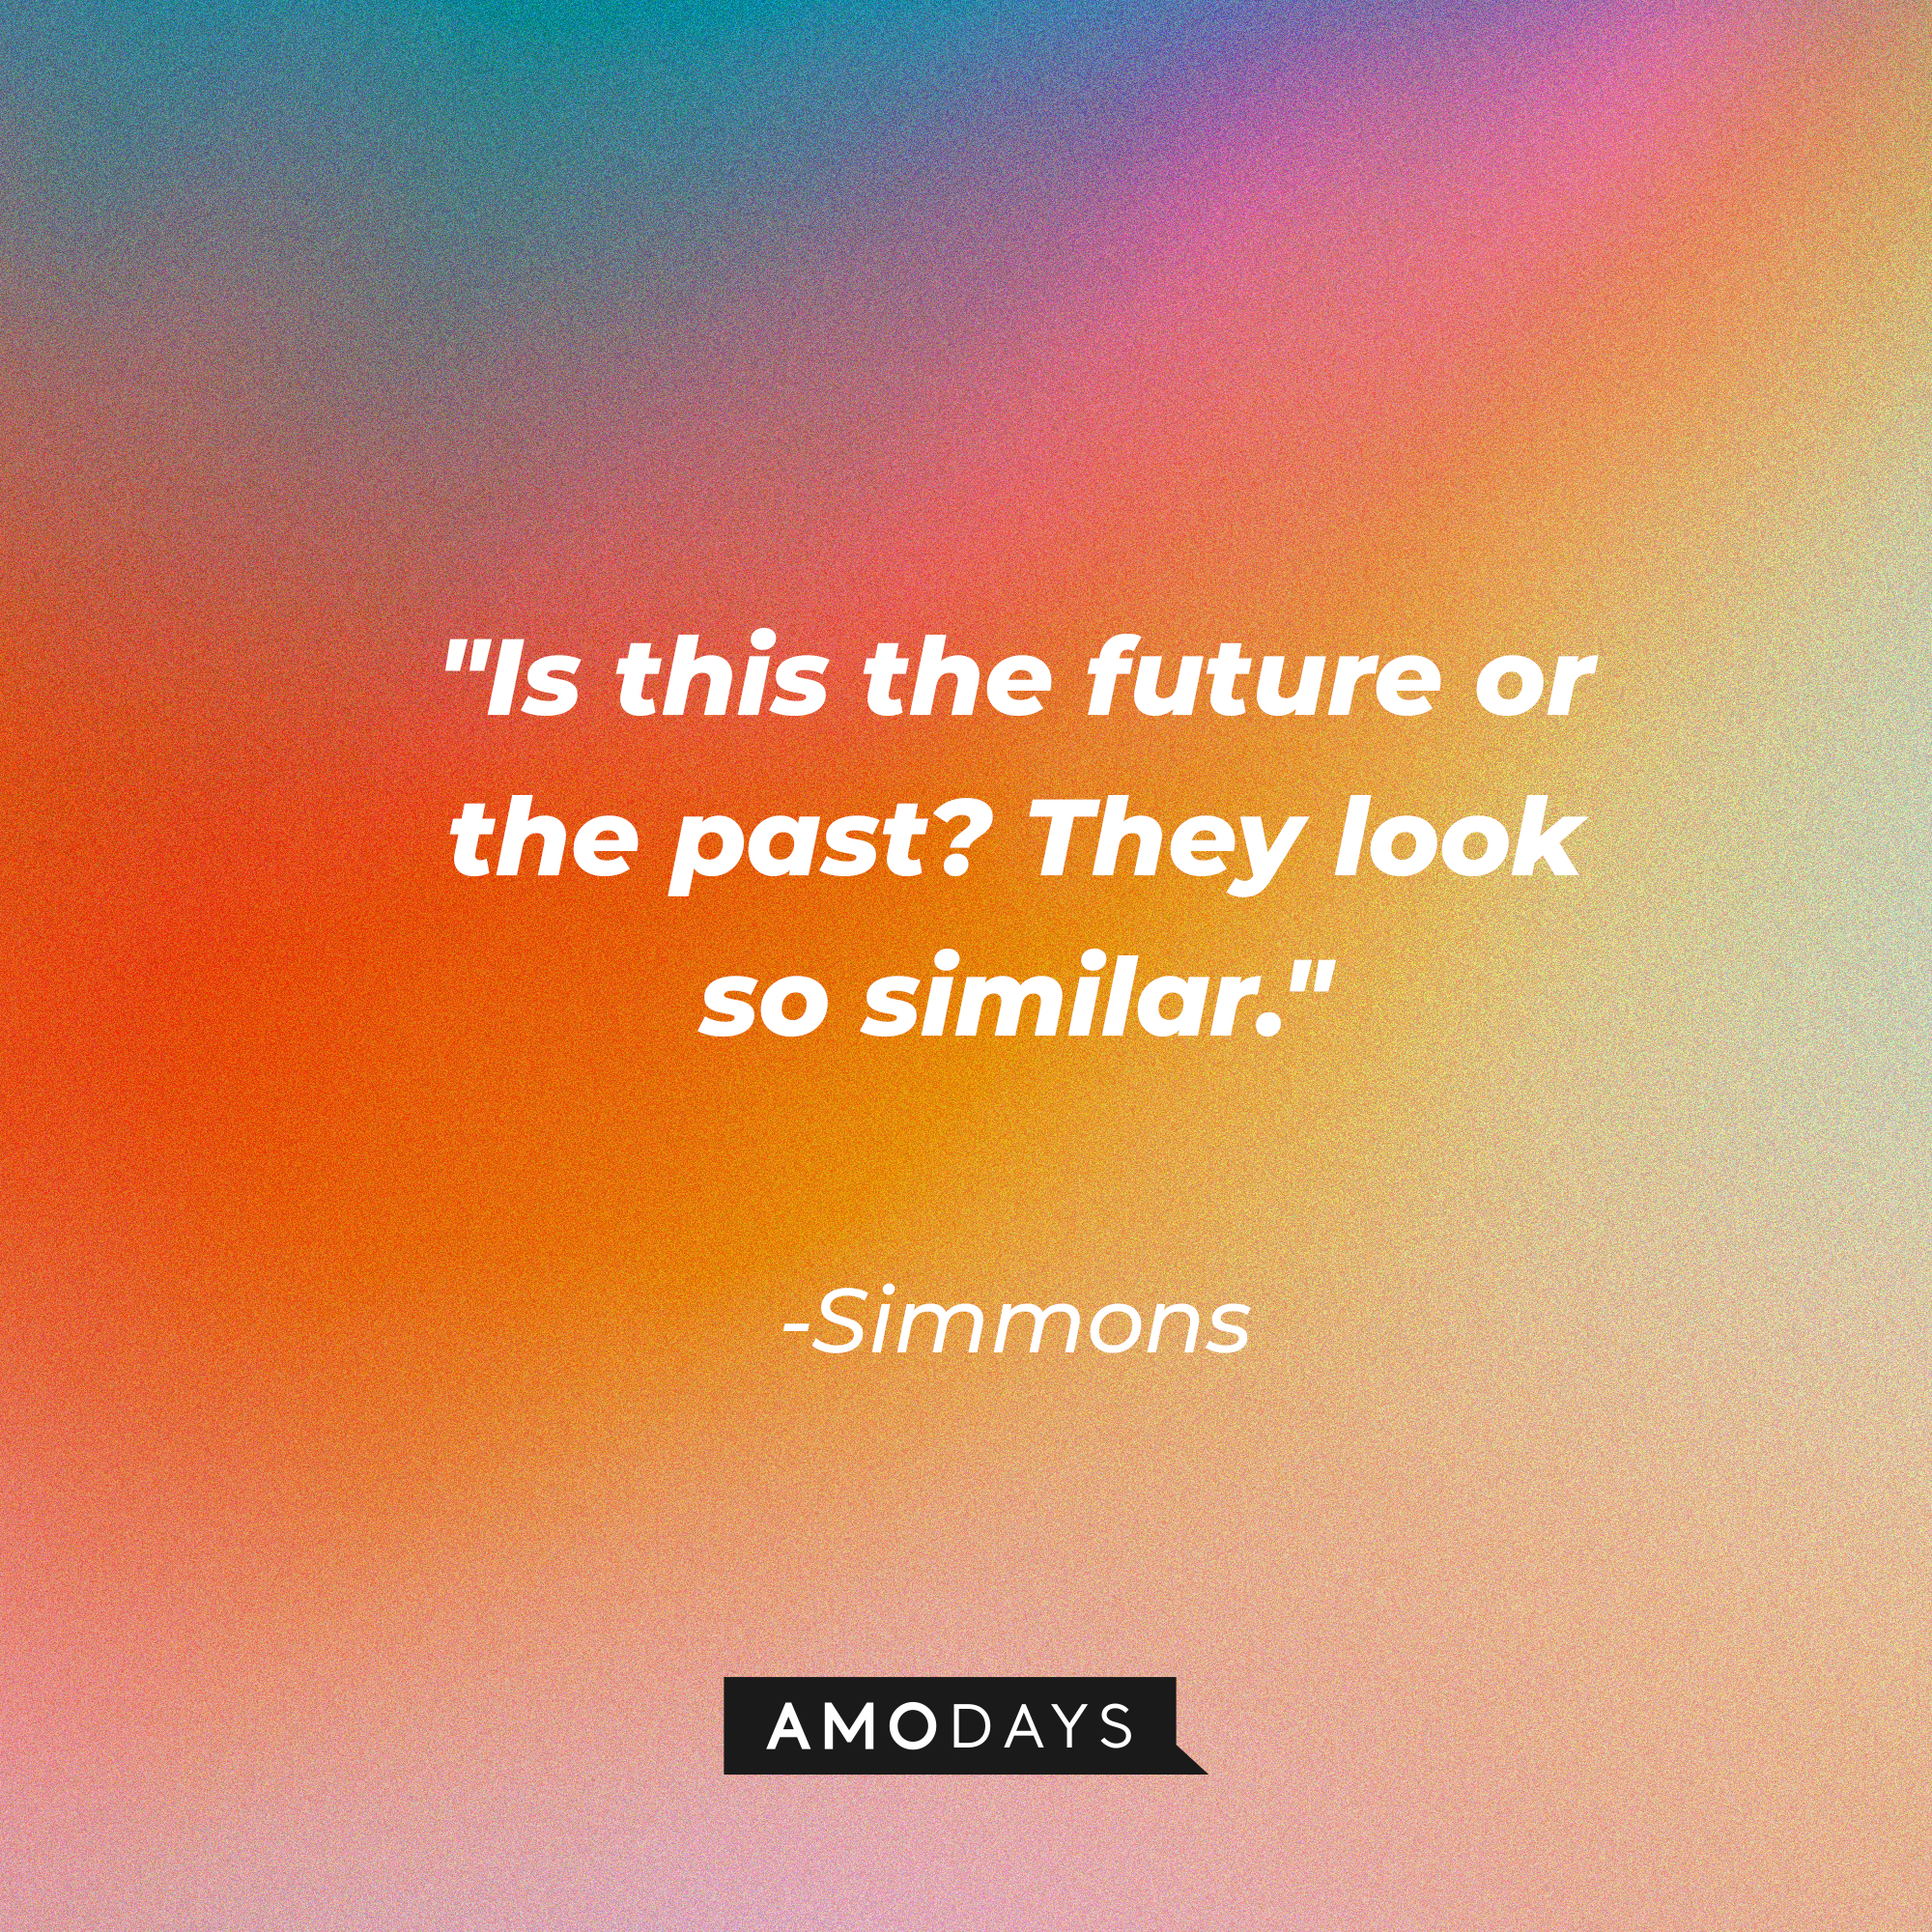 Simmons' quote: "Is this the future or the past? They look so similar." | Source: Amodays